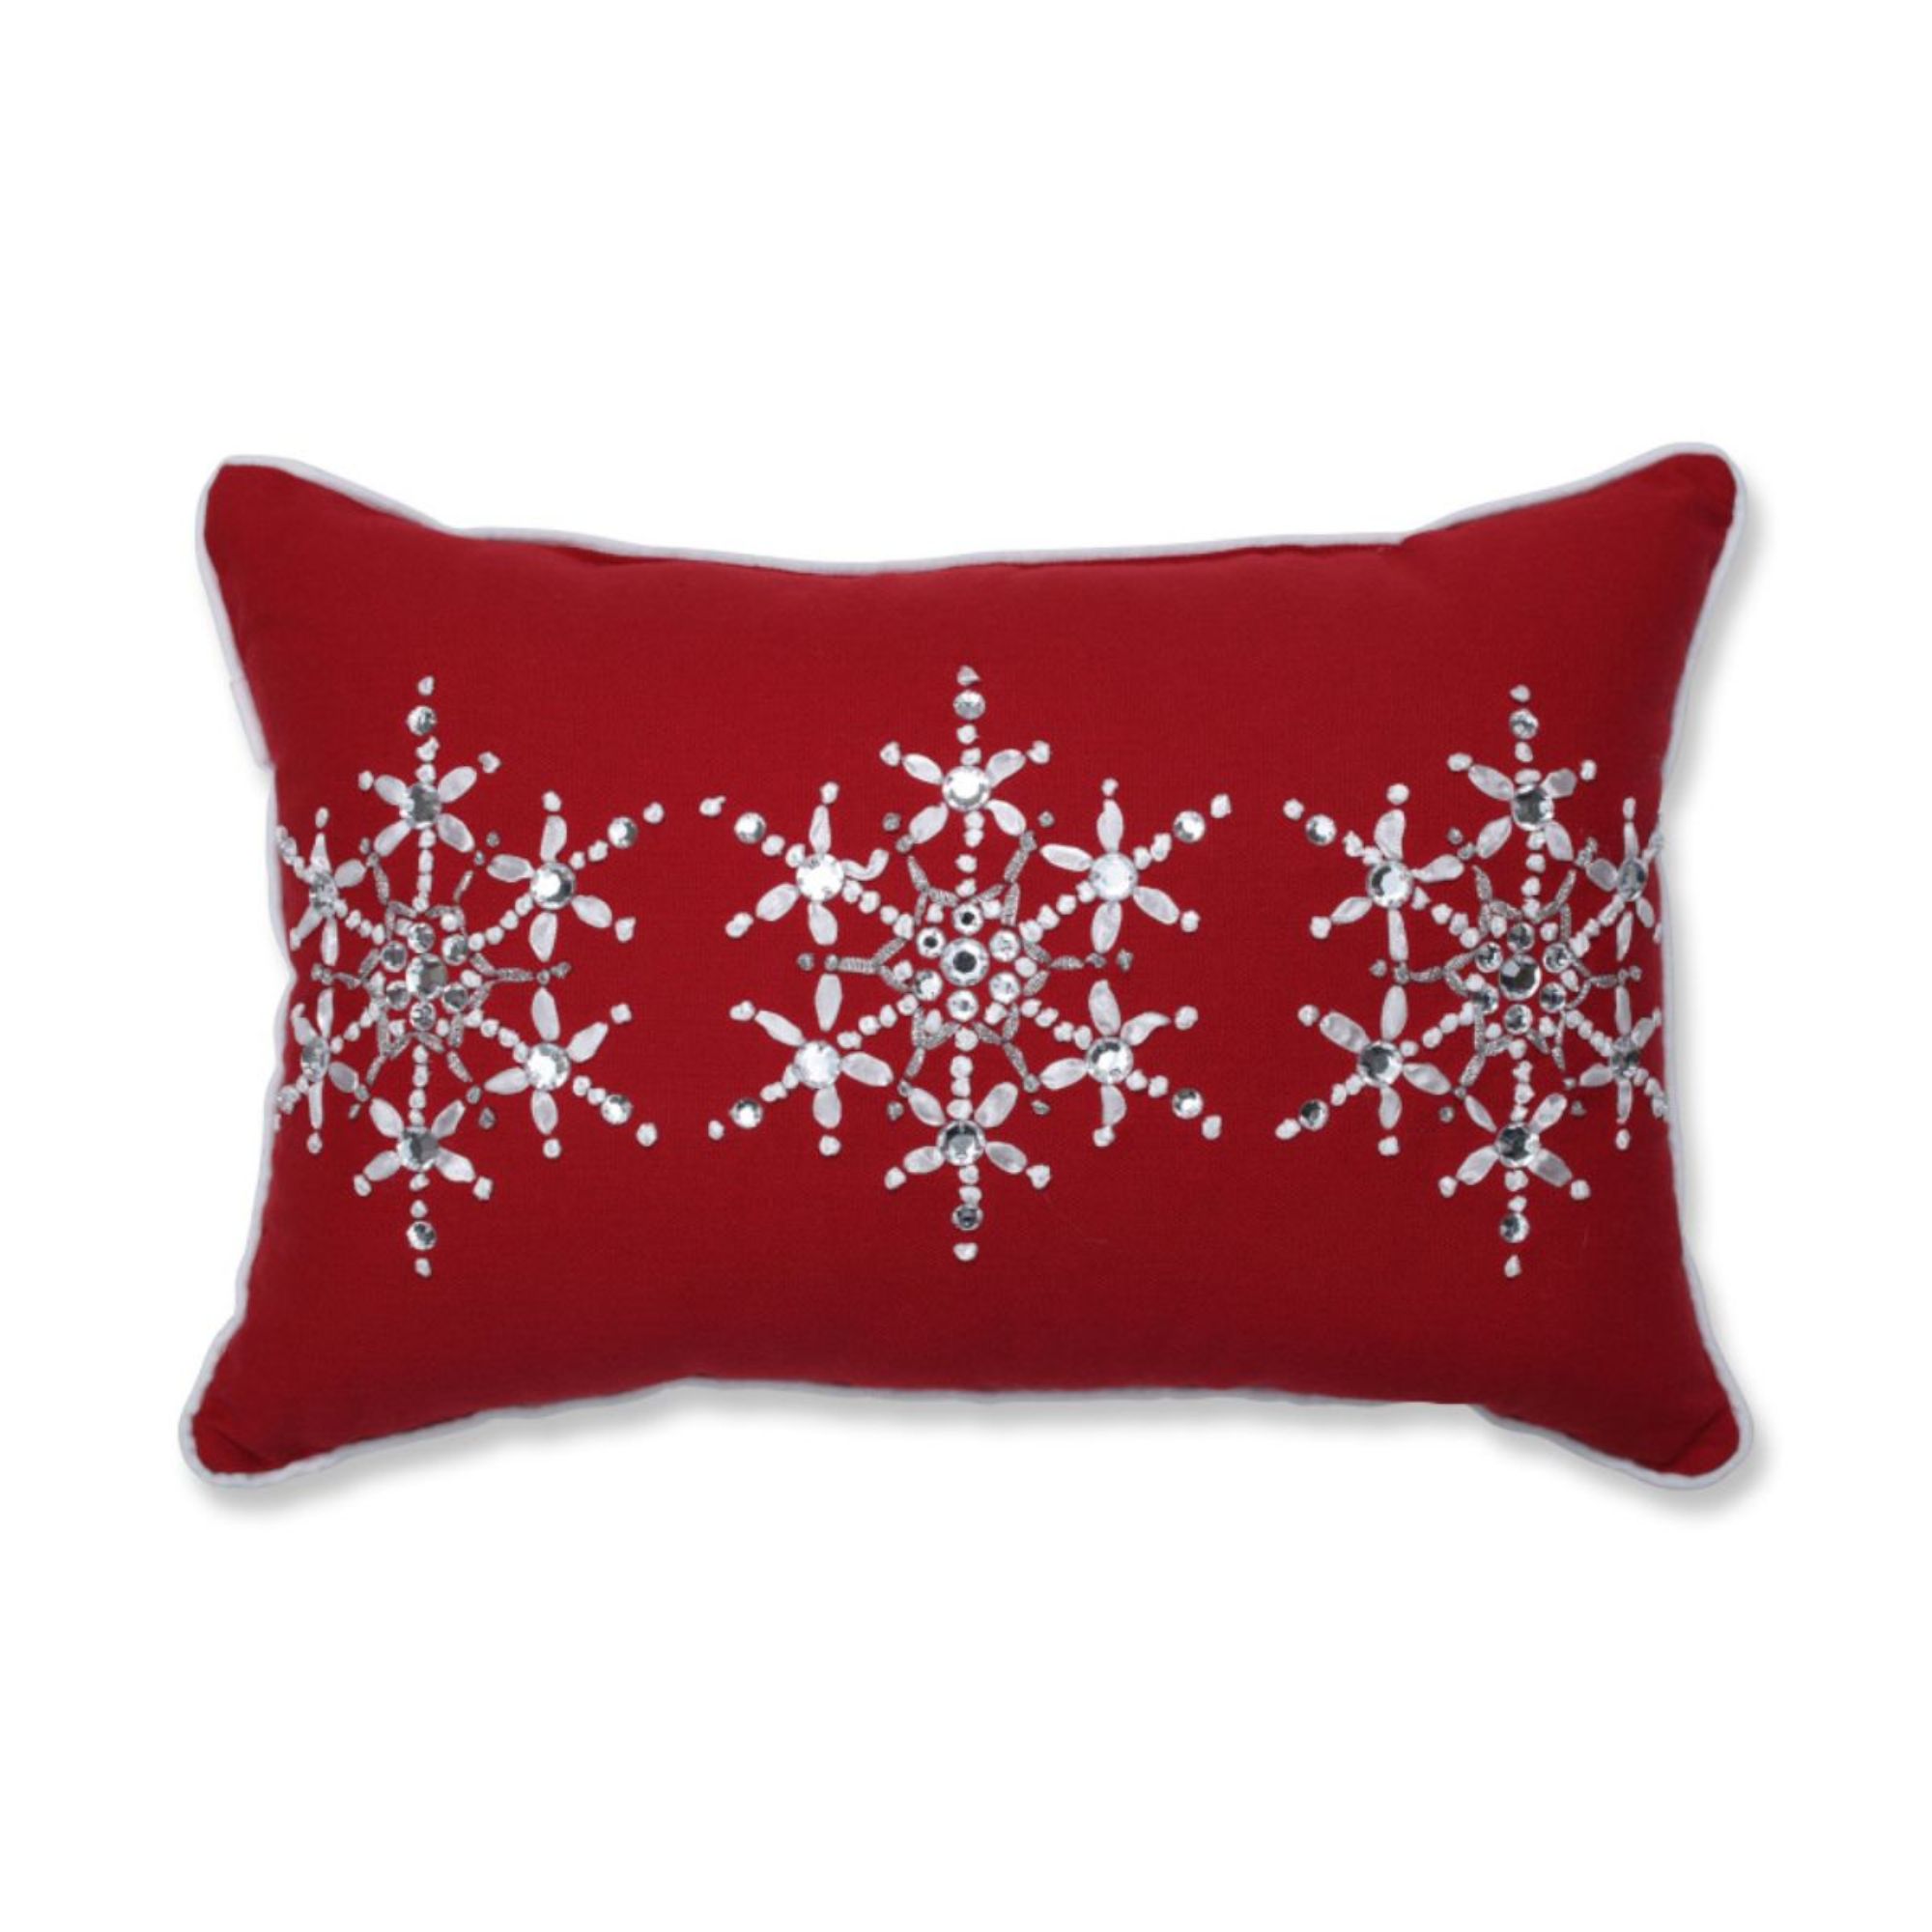 Pillow Perfect 18.5" Red and White Embroidered Snowflakes Rectangular Throw Pillow